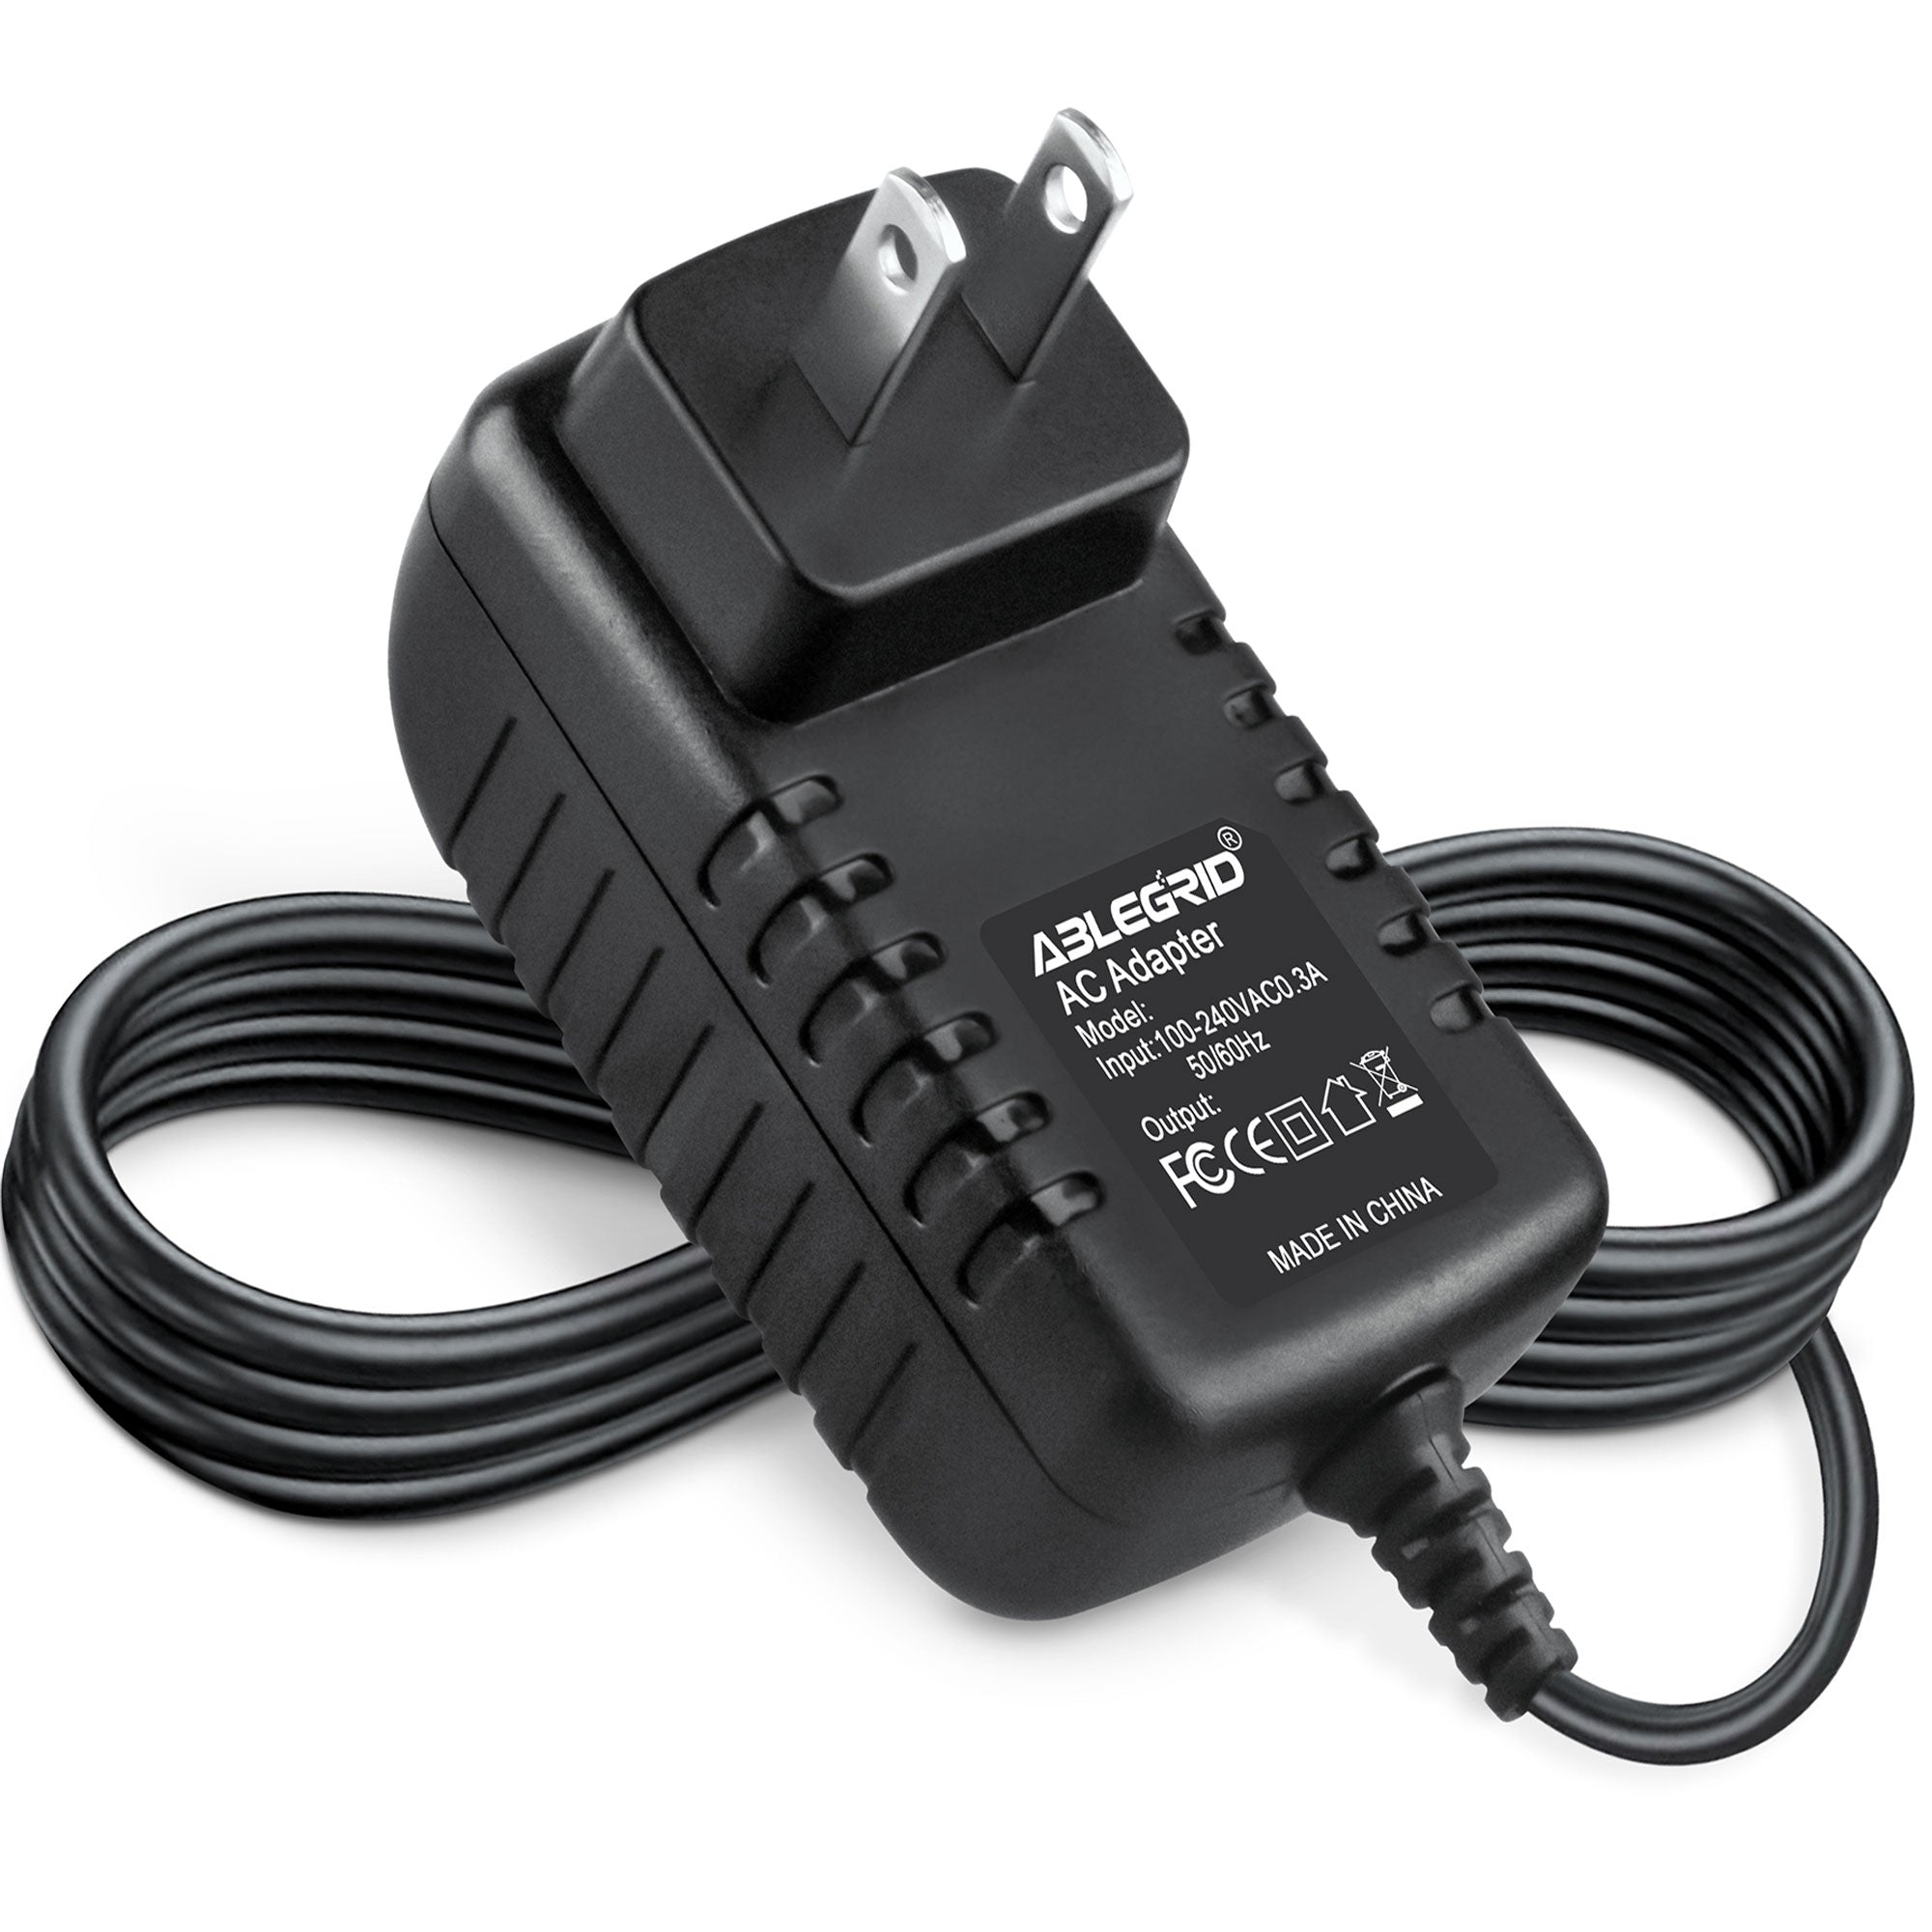 AbleGrid AC-DC Adapter for Standard Horizon Model: CWC260 Power Supply Cord Cable Battery Wall Home Charger Input: 100 - 240 VAC Worldwide Use Mains PSU